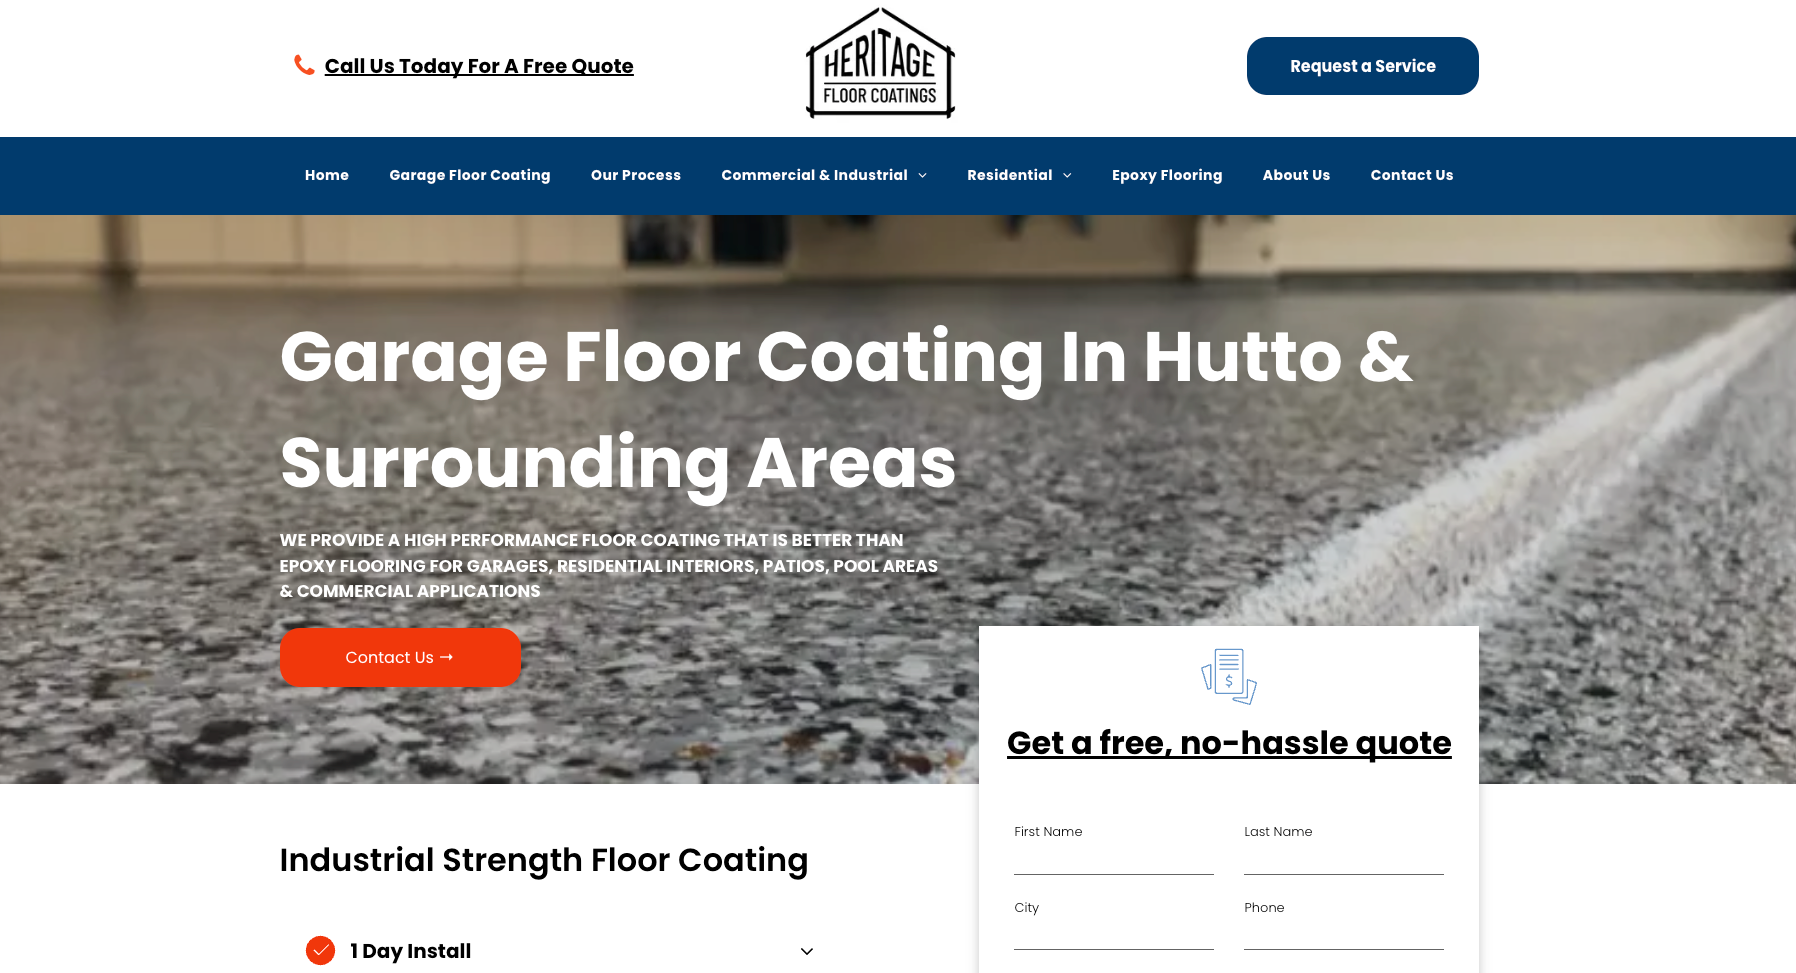 A screenshot of a website for garage floor coating in hutto and surrounding areas.